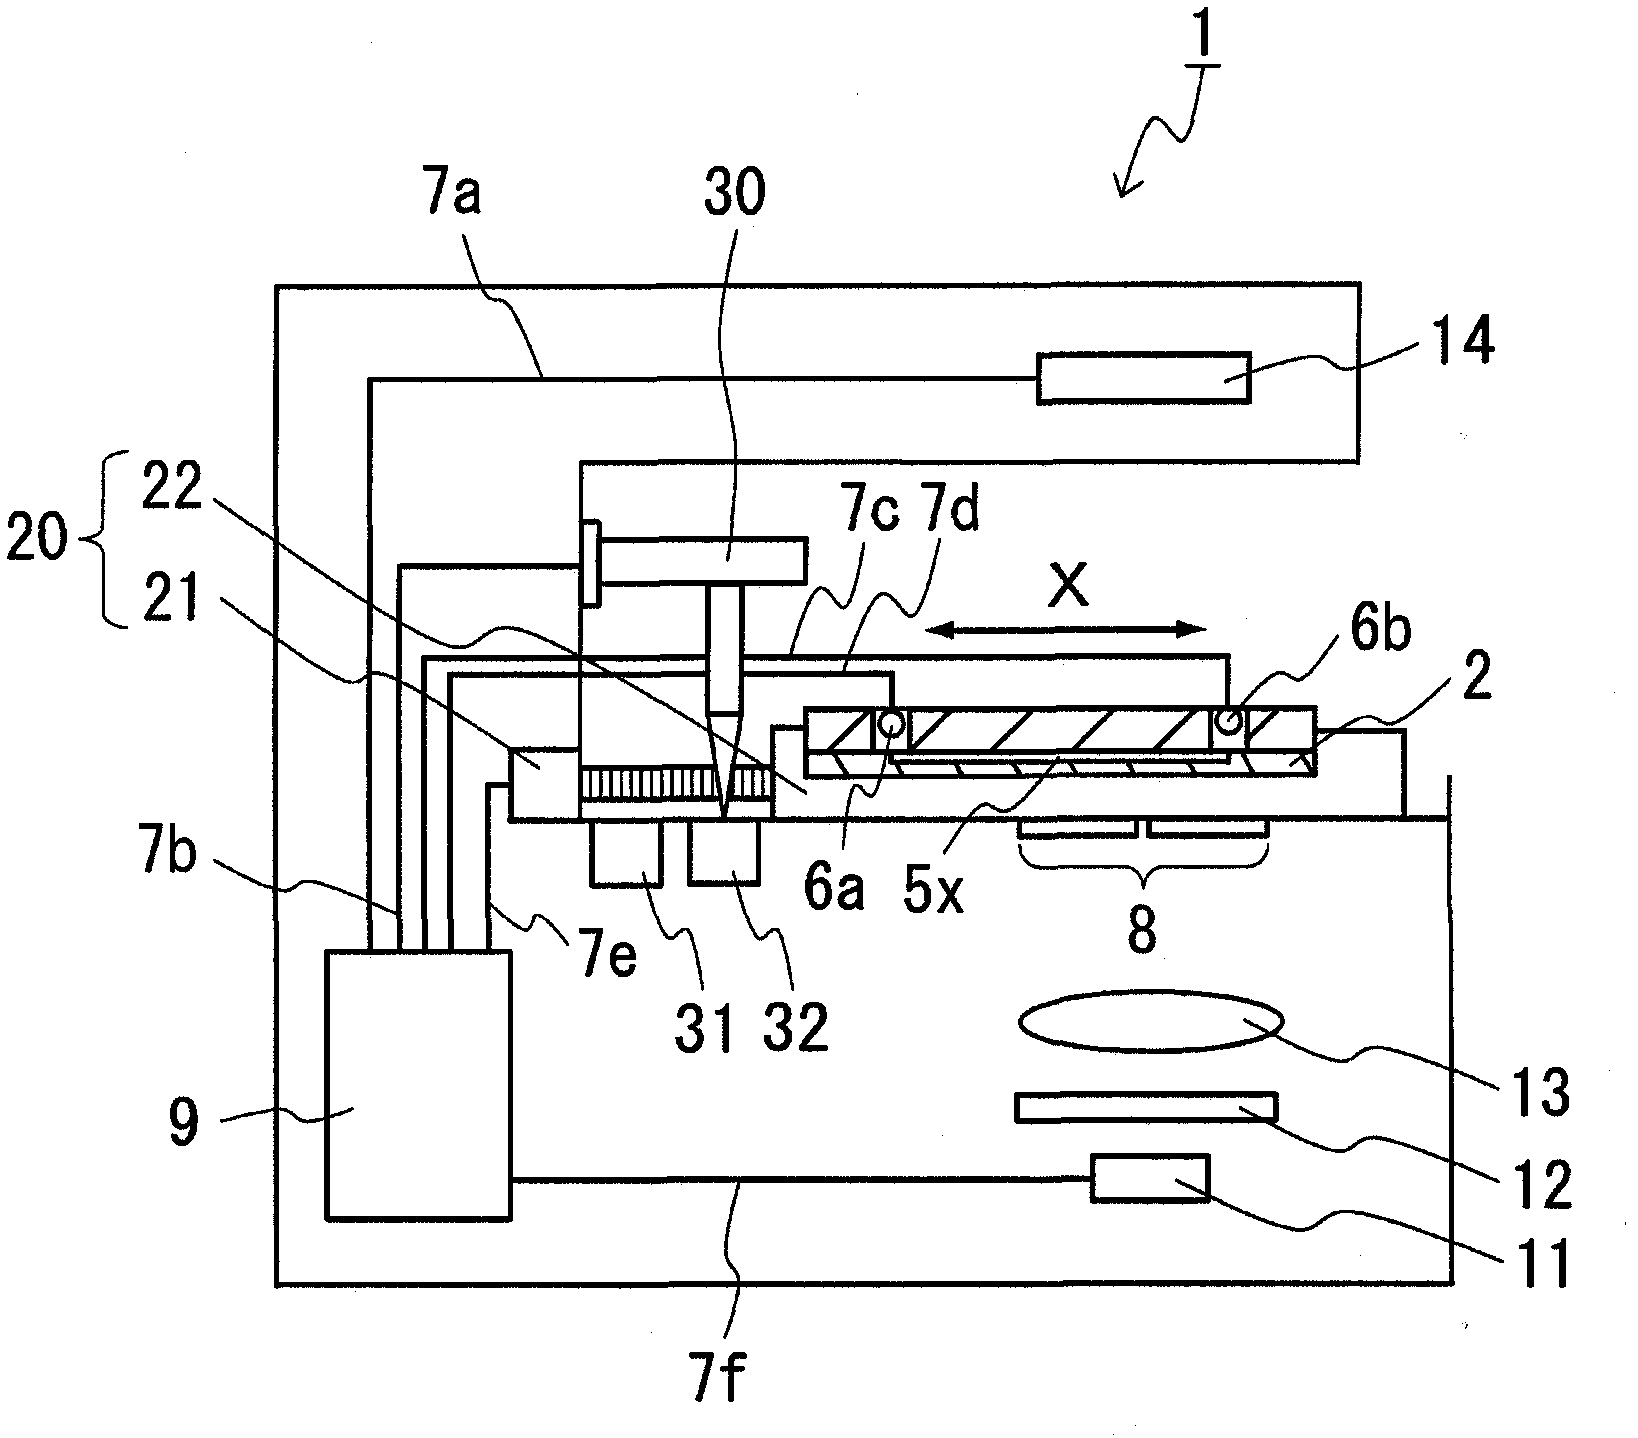 Apparatus and method for analysis by capillary electrophoretic method